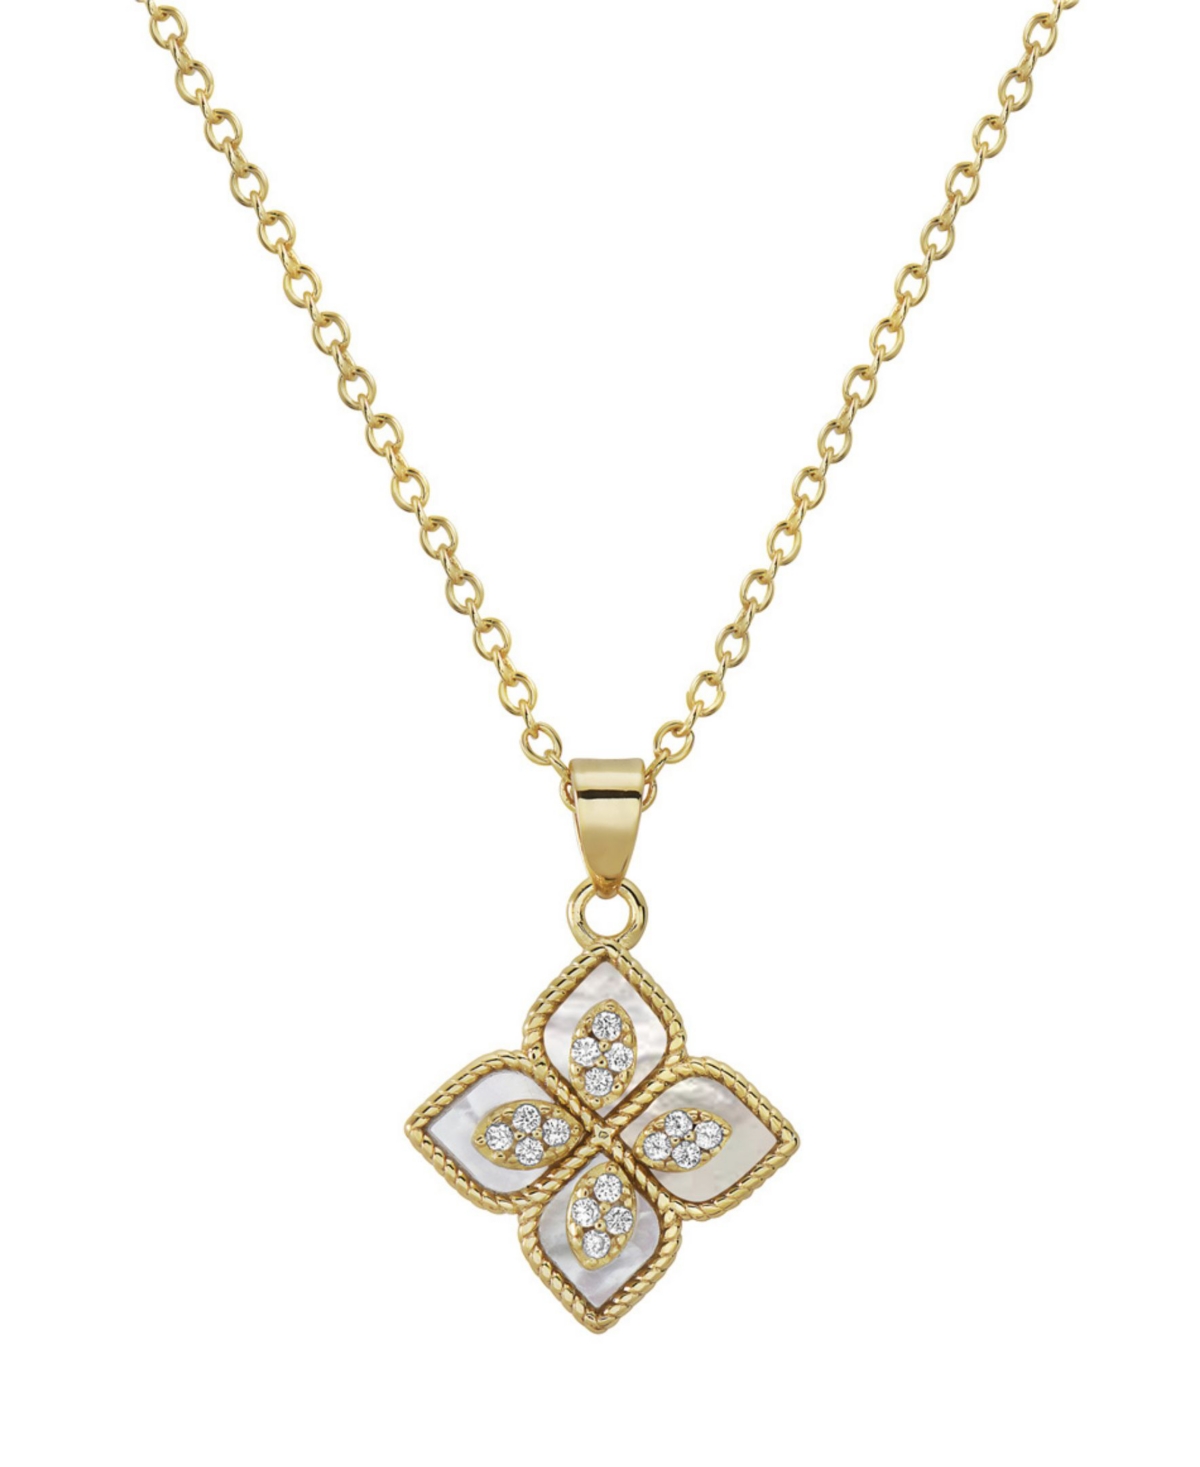 Shop Adornia 16-18" Adjustable 14k Gold Plated Renaissance Flower Crystal White Imitation Mother Of Pearl Necklac